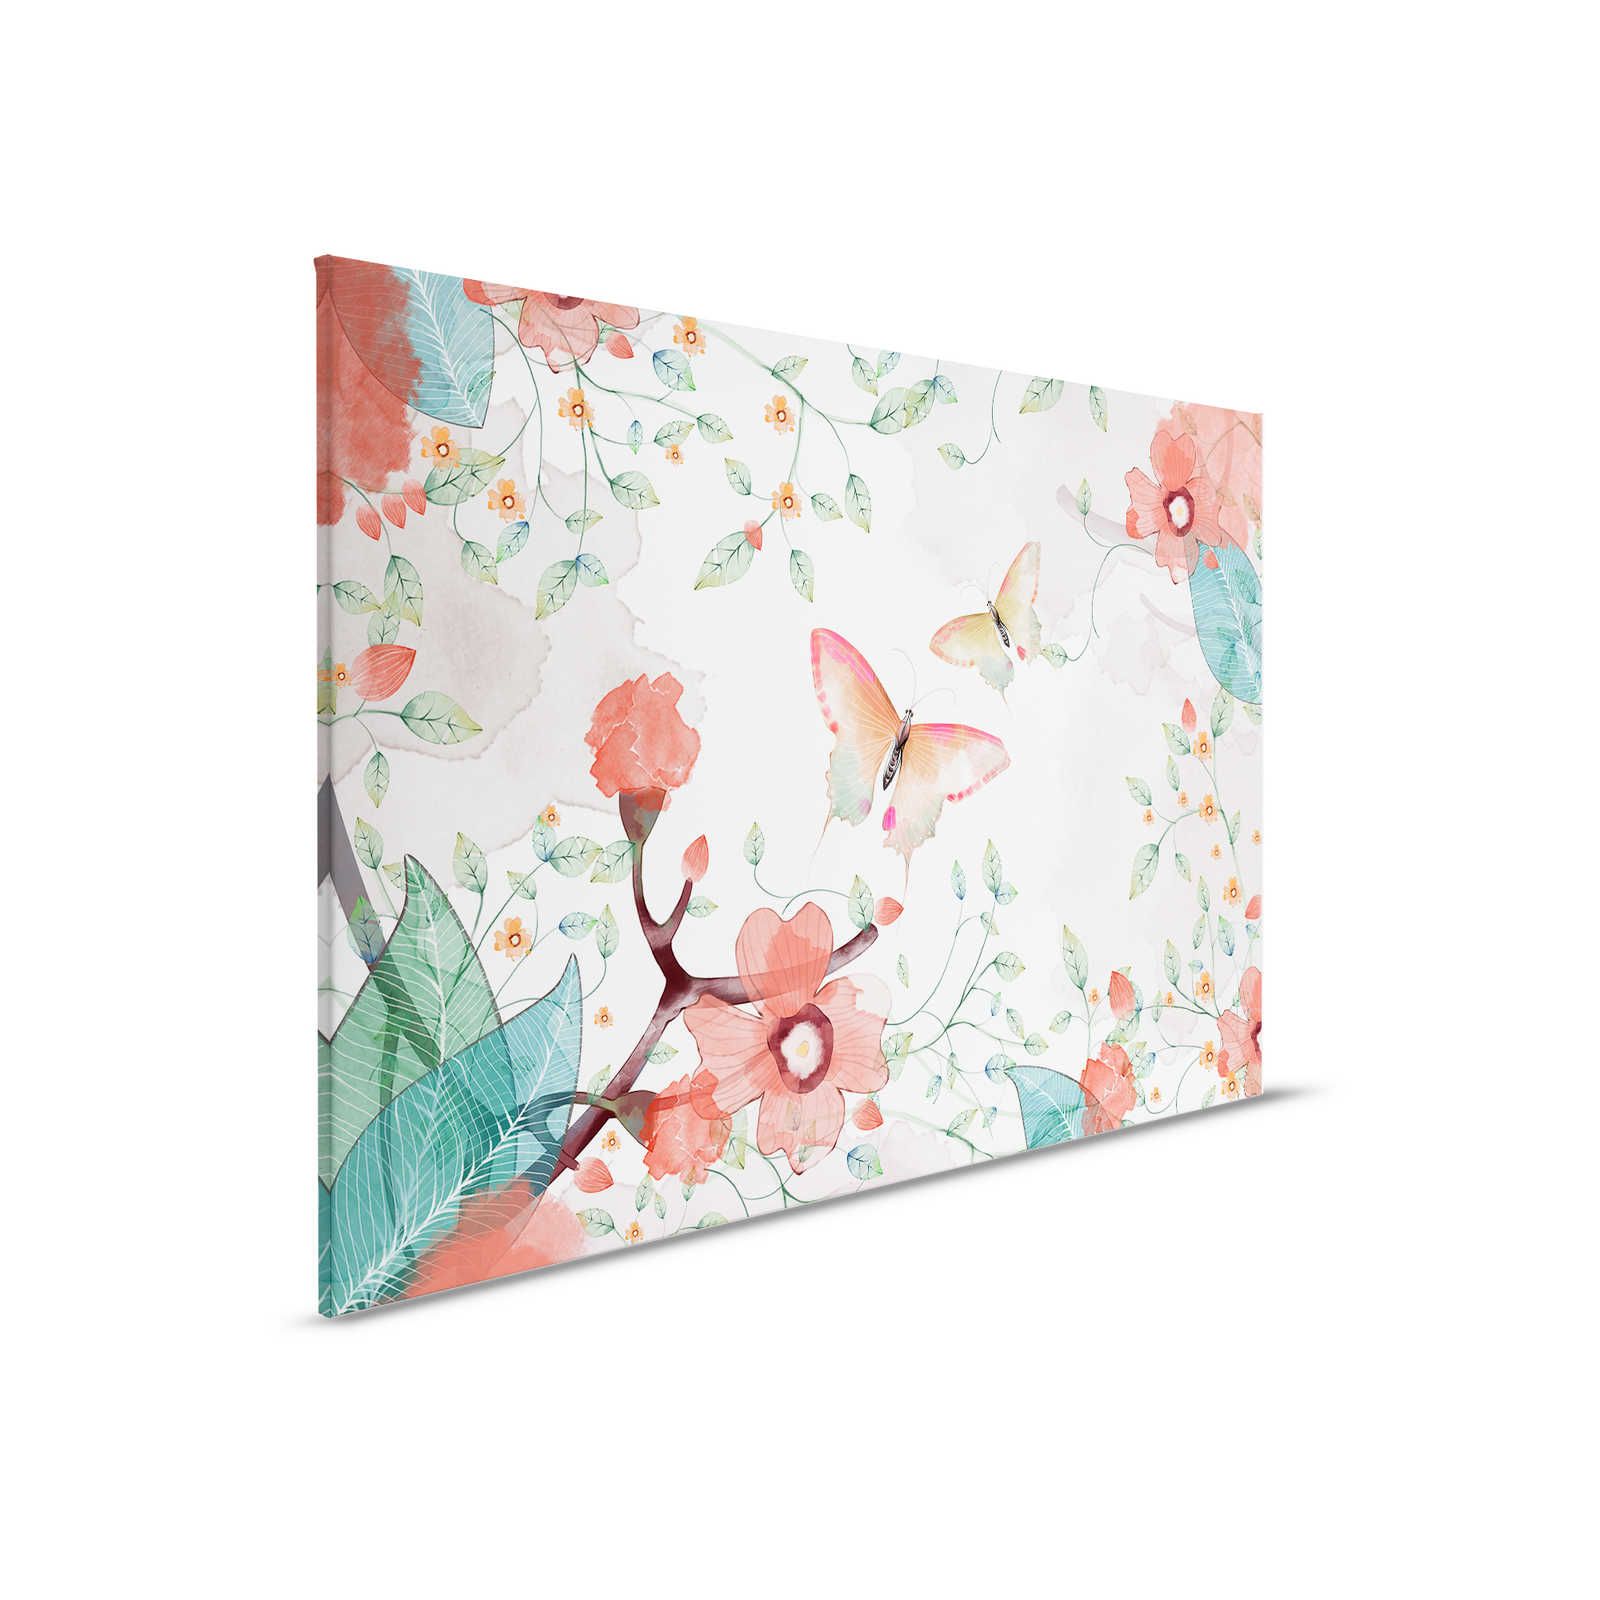         Canvas floral with leaves and butterflies - 90 cm x 60 cm
    